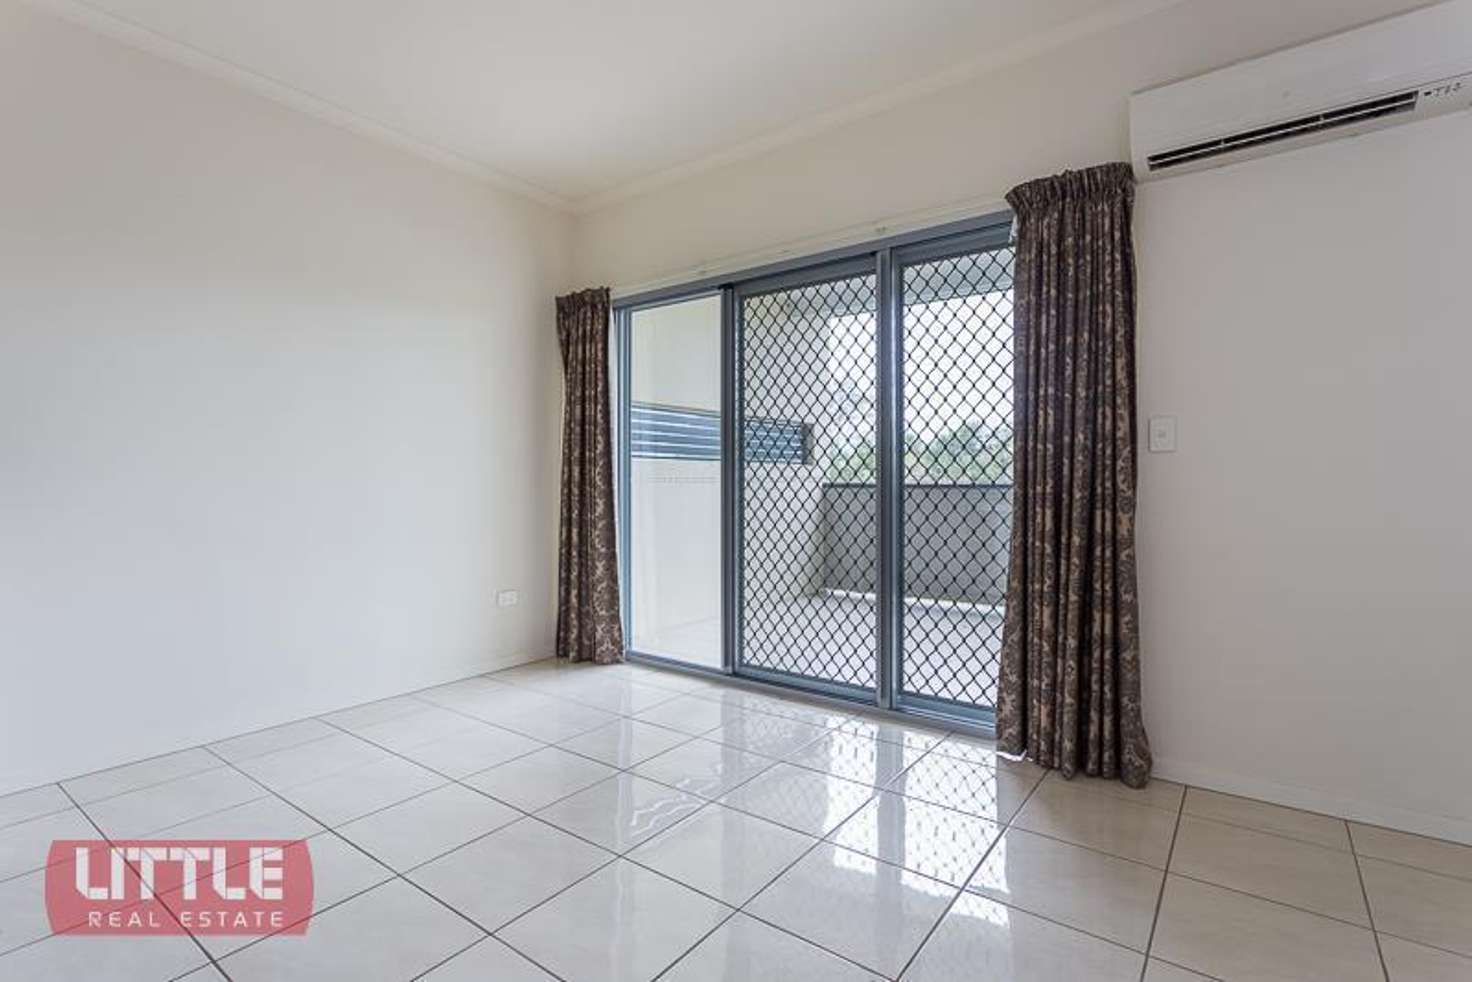 Main view of Homely unit listing, 10/208 Pickering Street, Enoggera QLD 4051